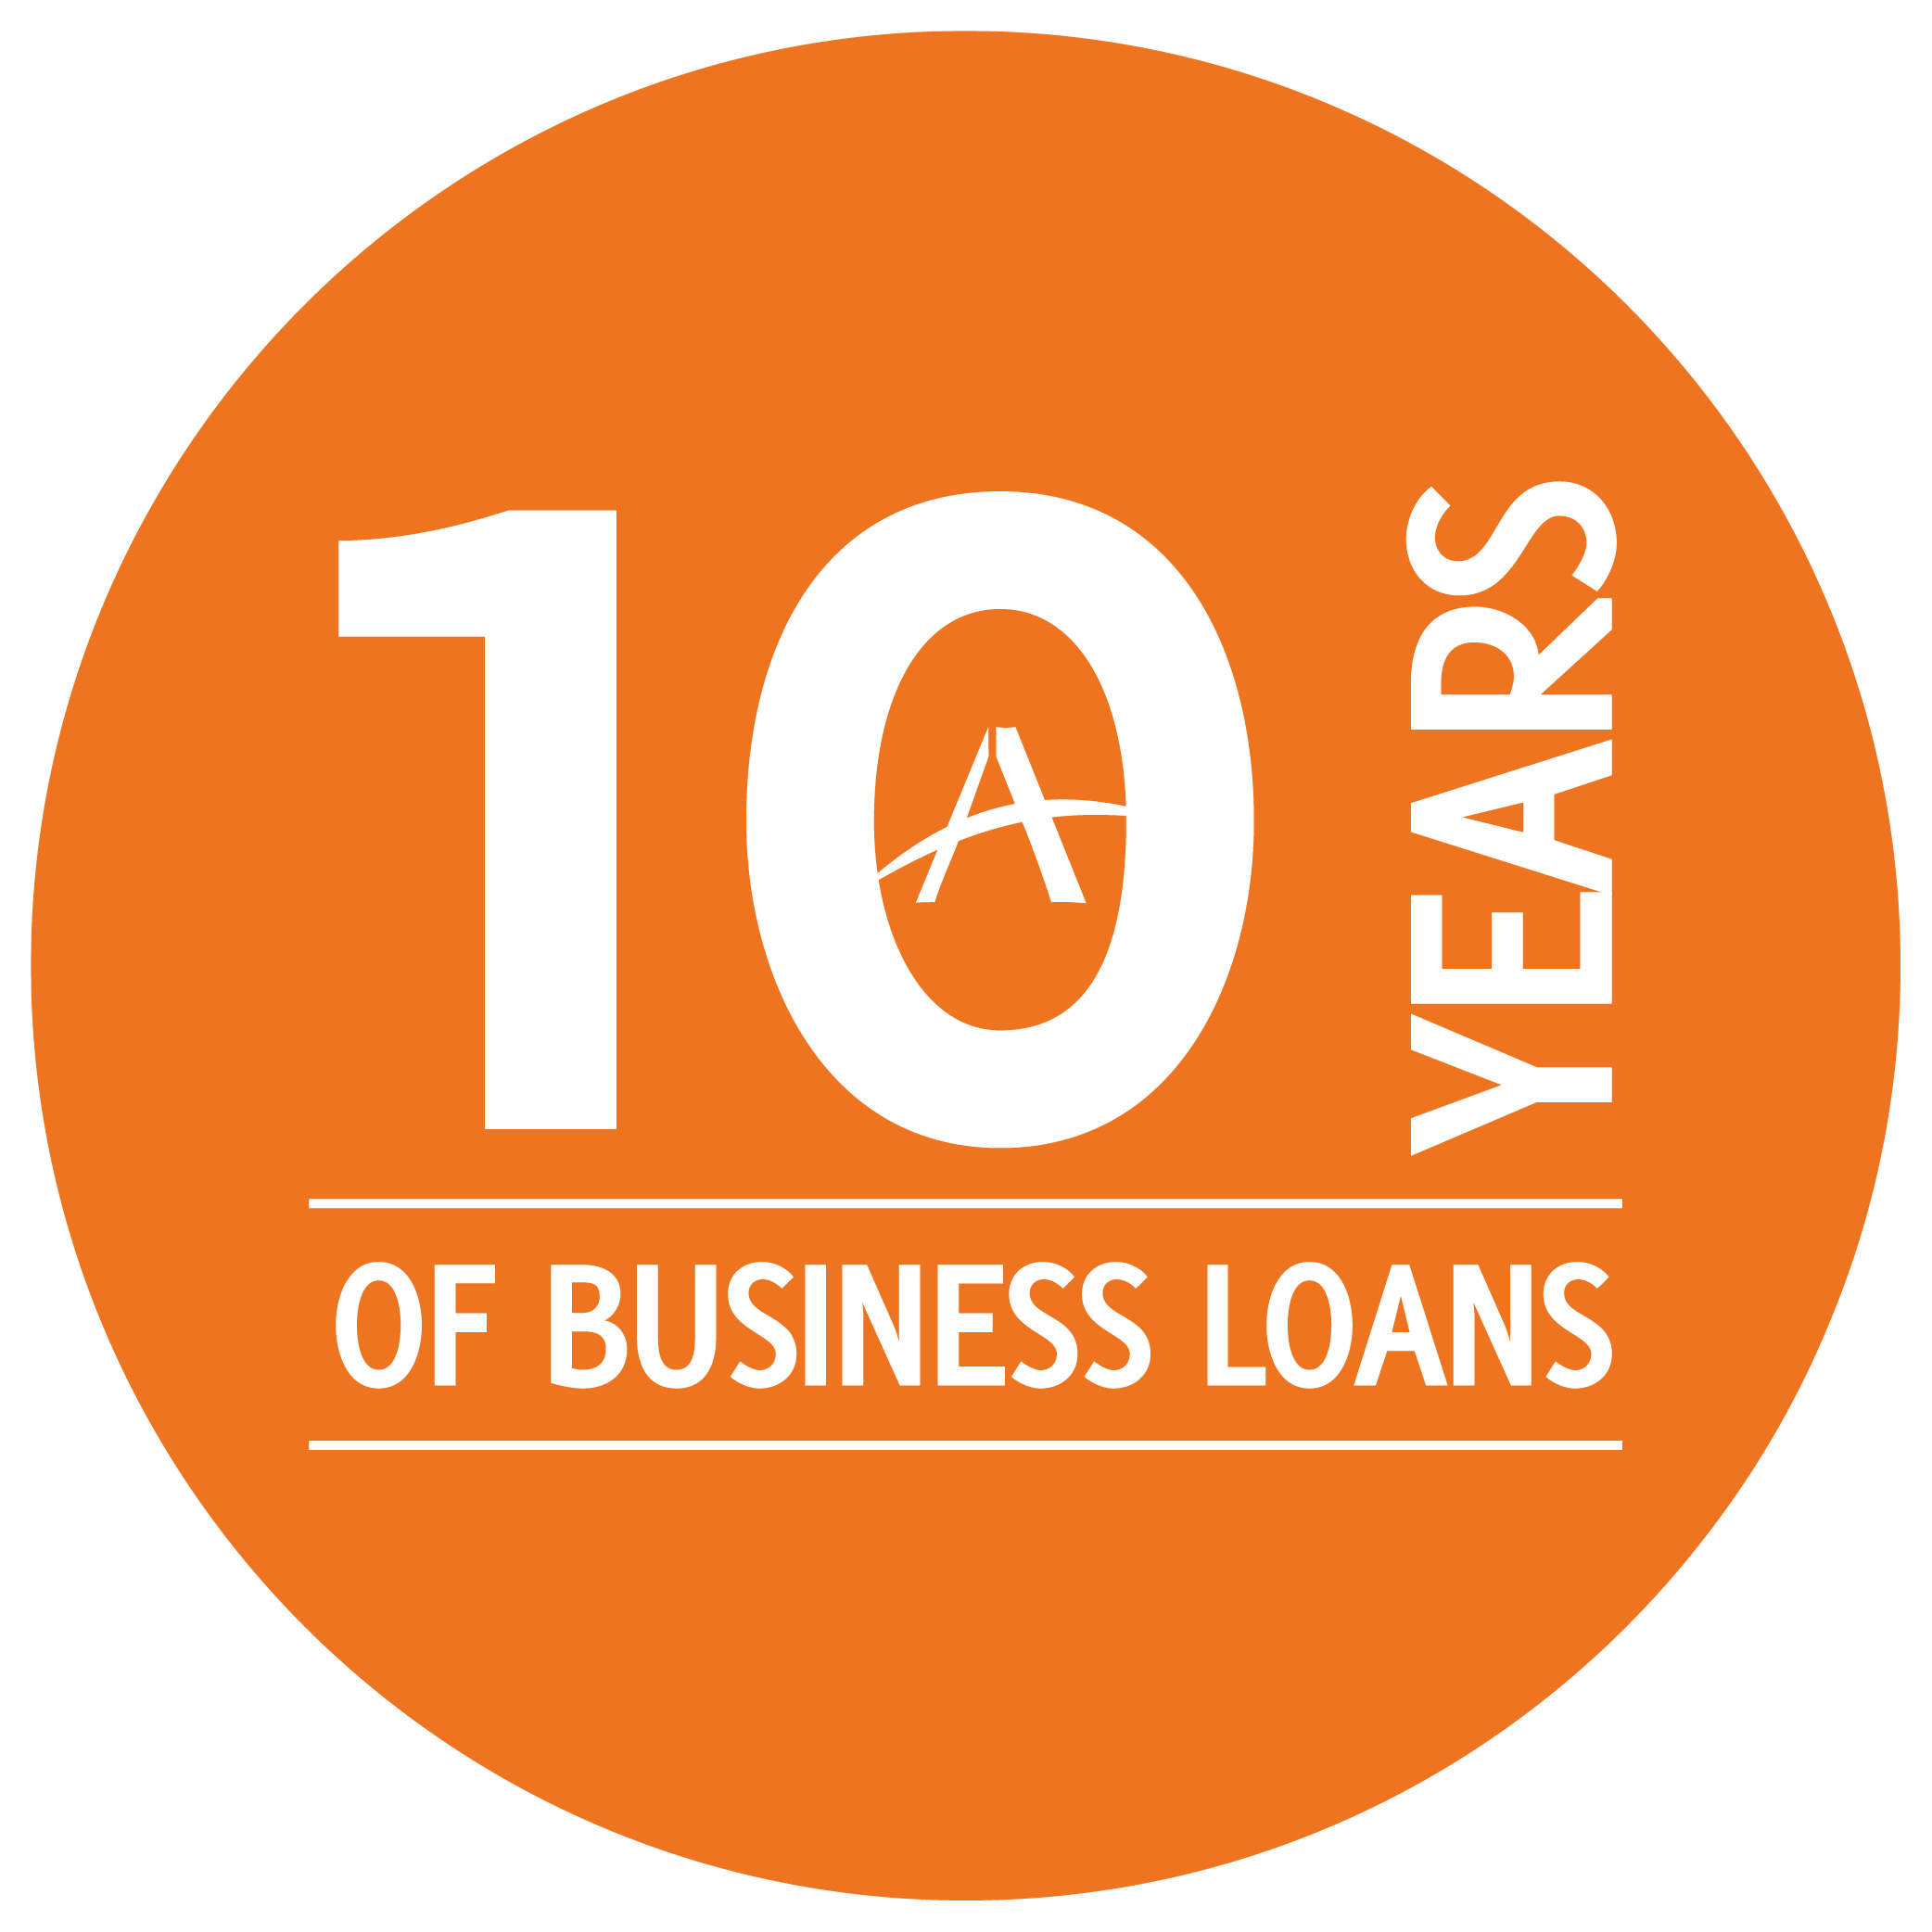 10 Years Of Business Loans